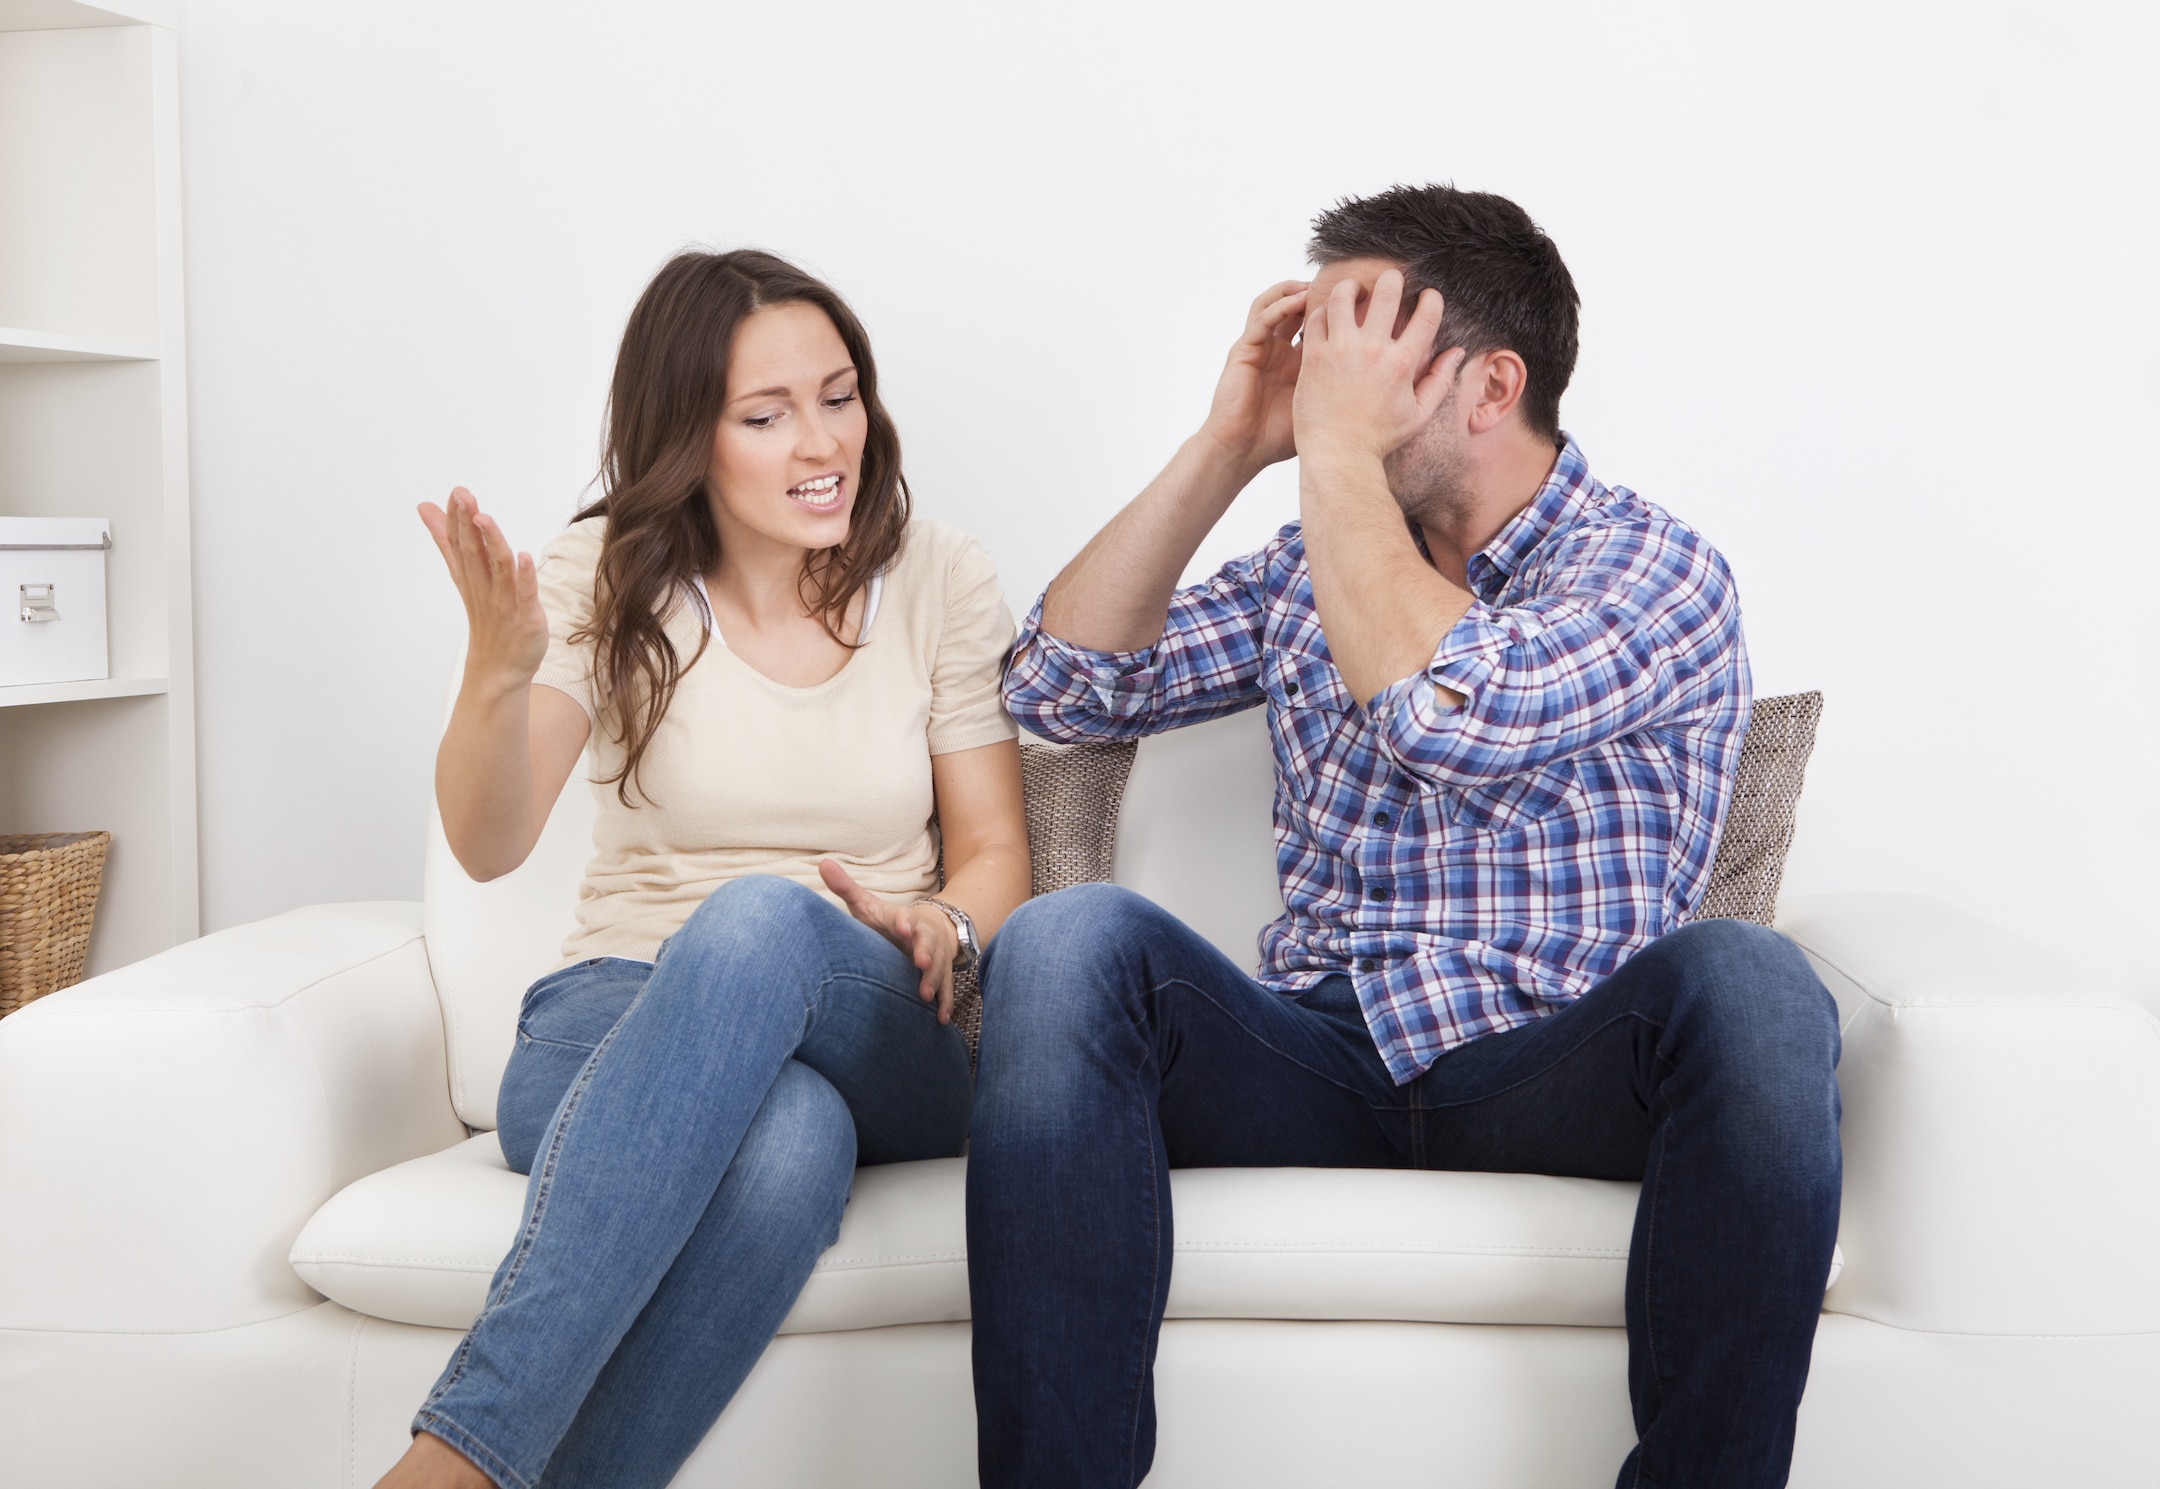 Couple learning to deal with conflict in a healthy productive way